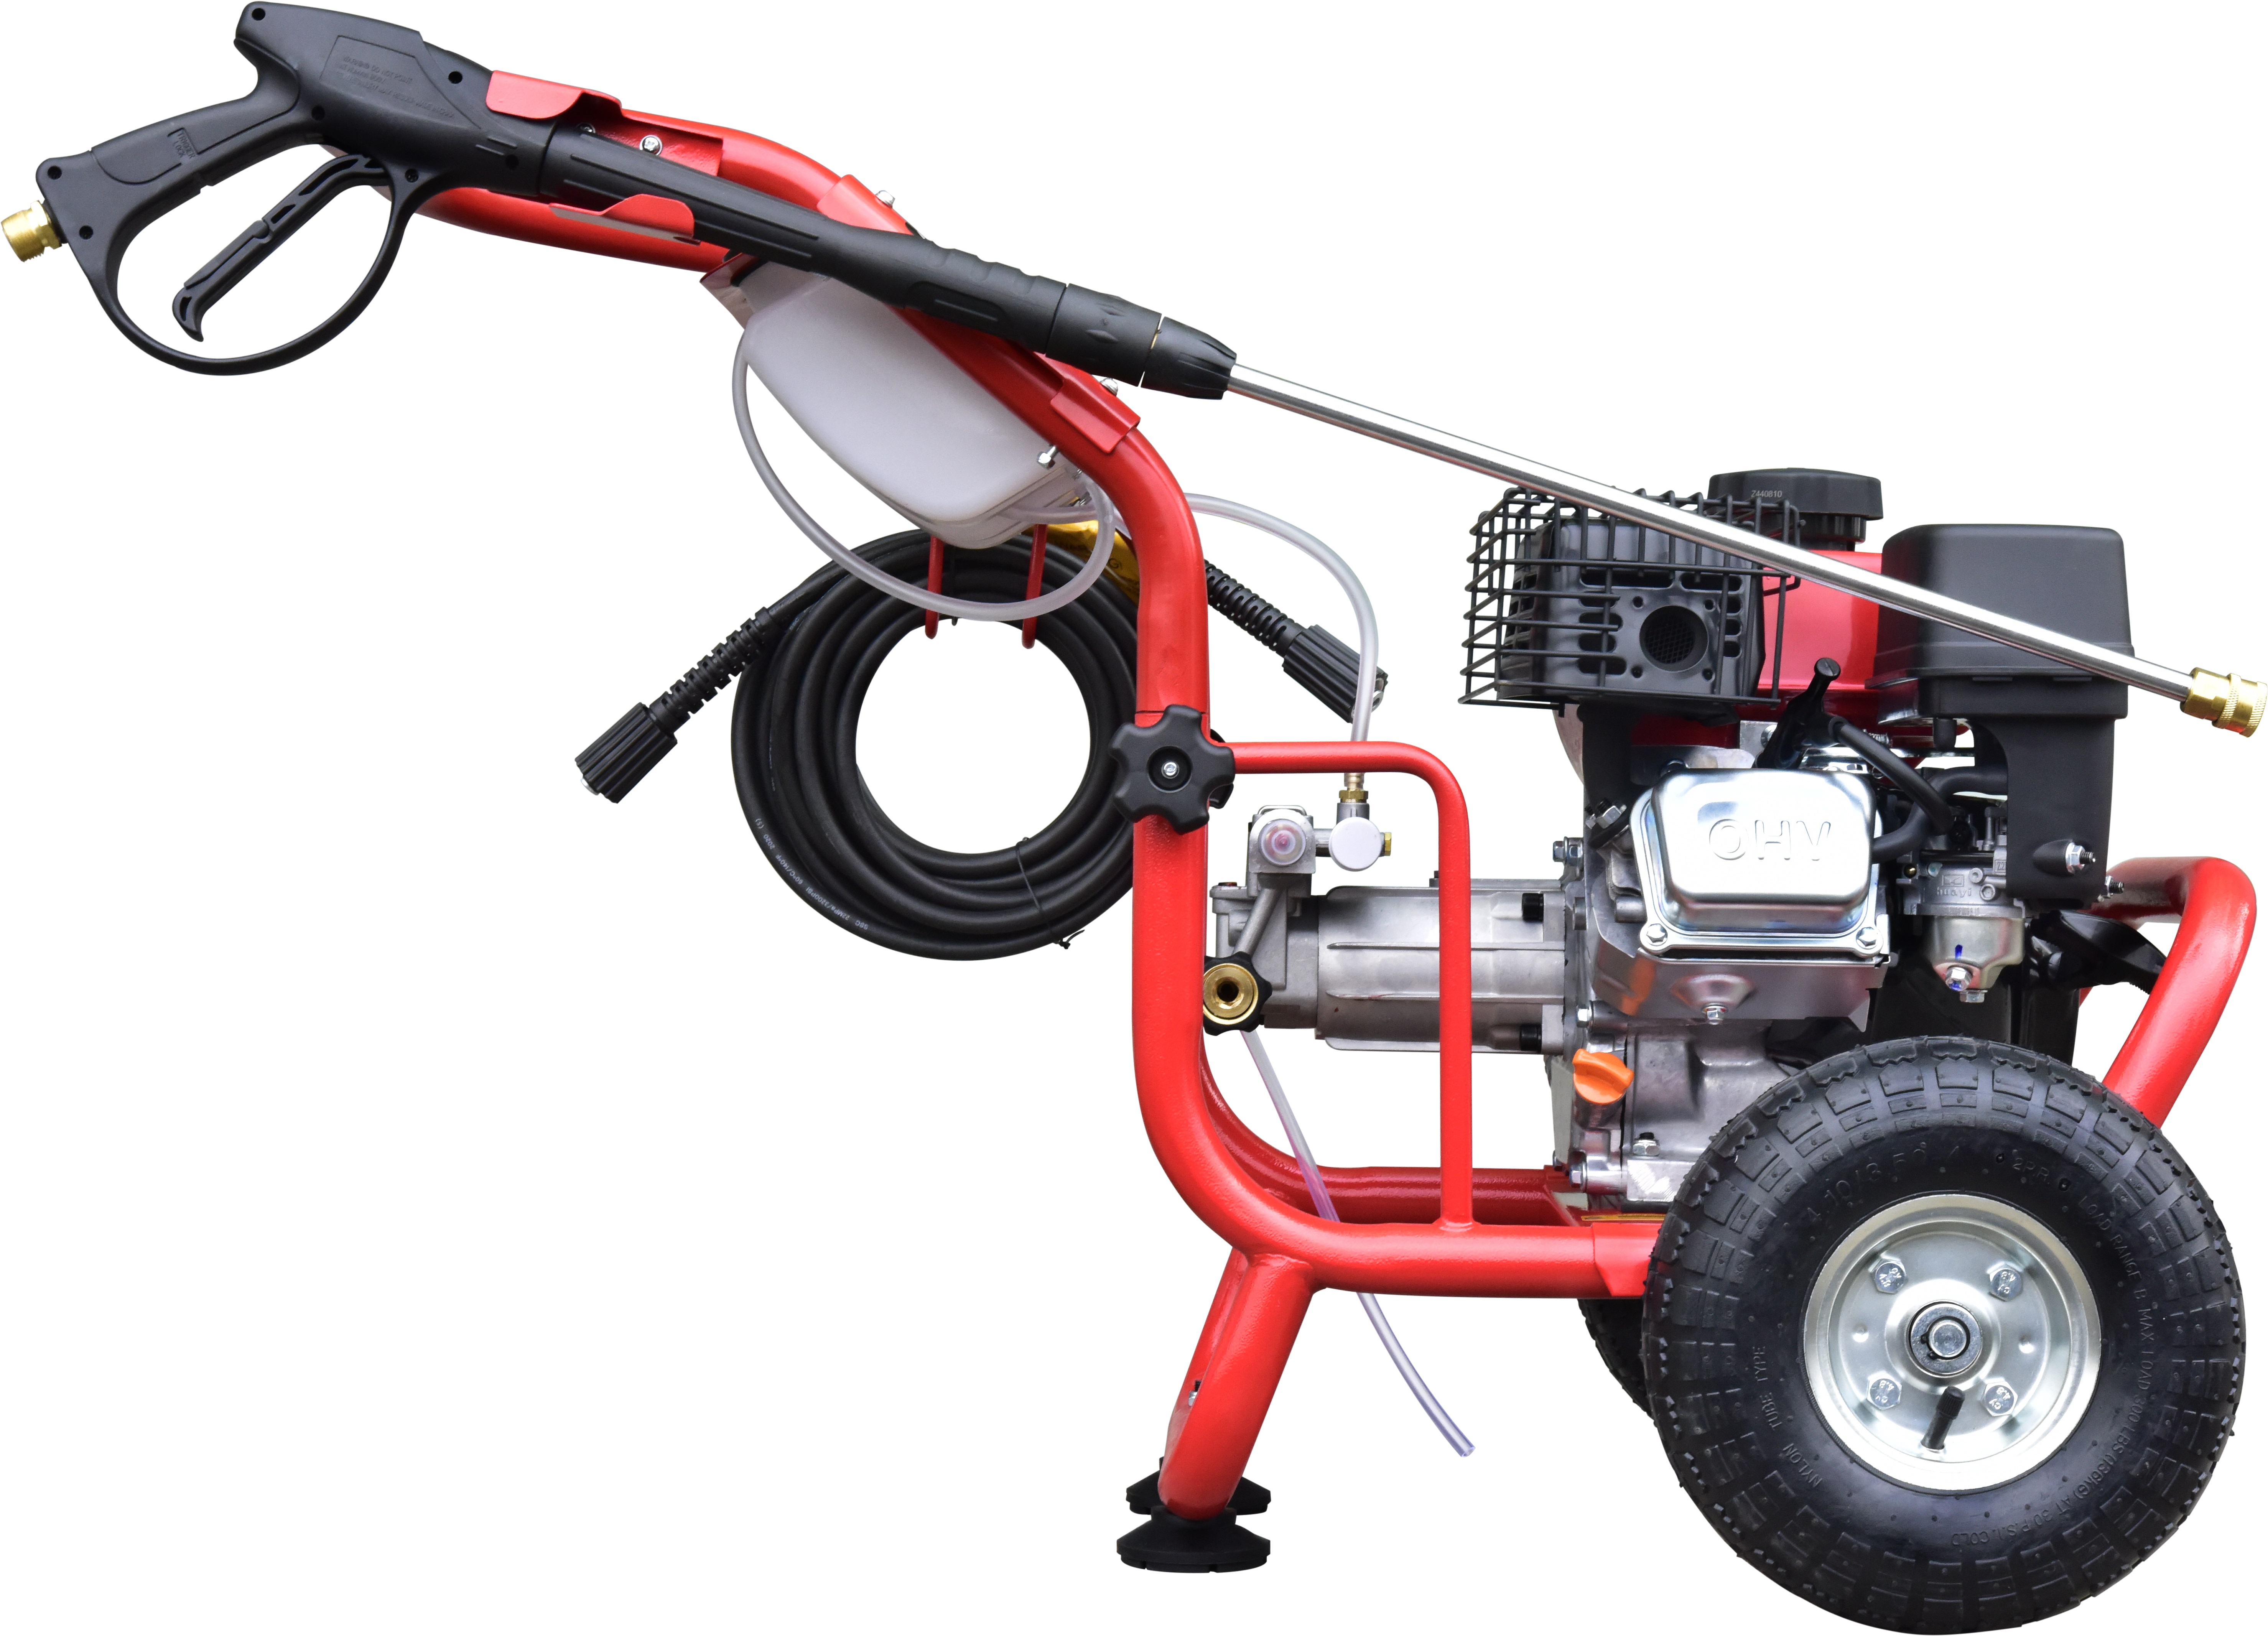 All Power America 3100 PSI, 2.6 GPM Gas Pressure Washer w/ 30 ft High Pressure Hose, C.A.R.B. Compliant, APW5118A - image 4 of 6